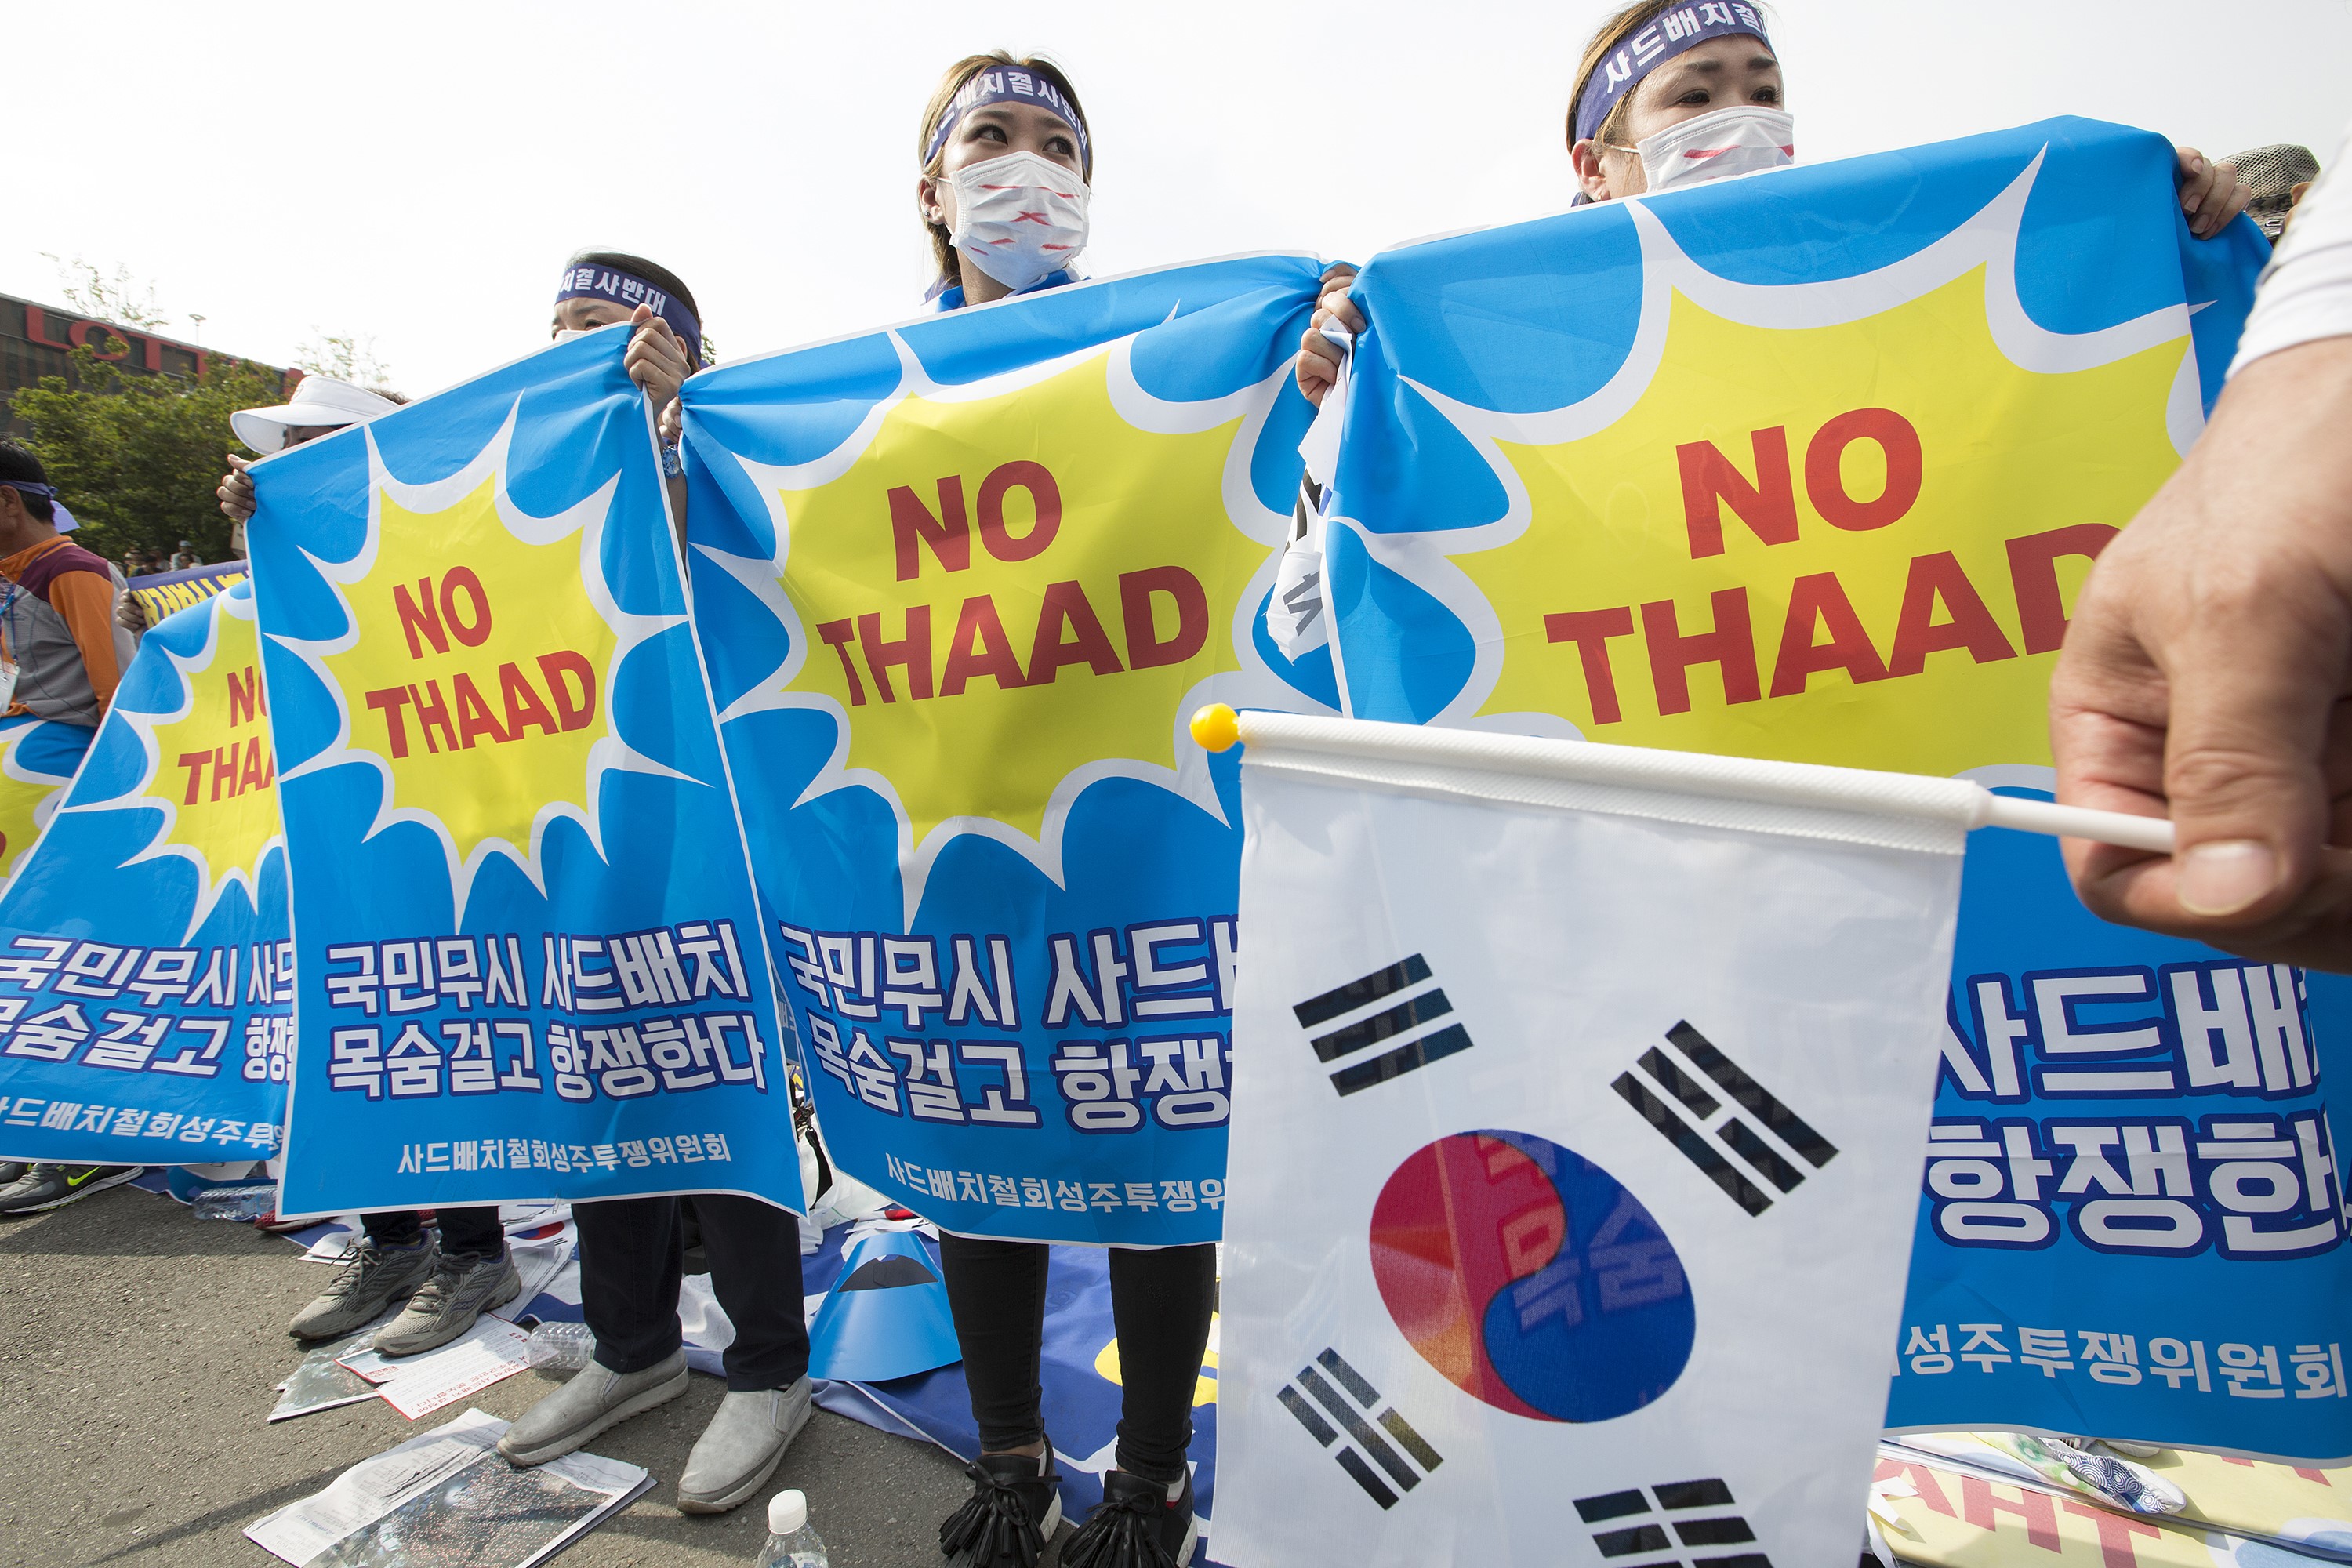 Residents of the Seongju municipality attend a rally in front of Seoul Station in Seoul, South Korea, 21 July 2016, to protest against the deployment of an advanced US missile defense system, known as Terminal High Altitude Area Defense (THAAD), in the town of Seongju, a county some 300 kilometers southeast of Seoul. (Anadolu Agency—Getty Images)